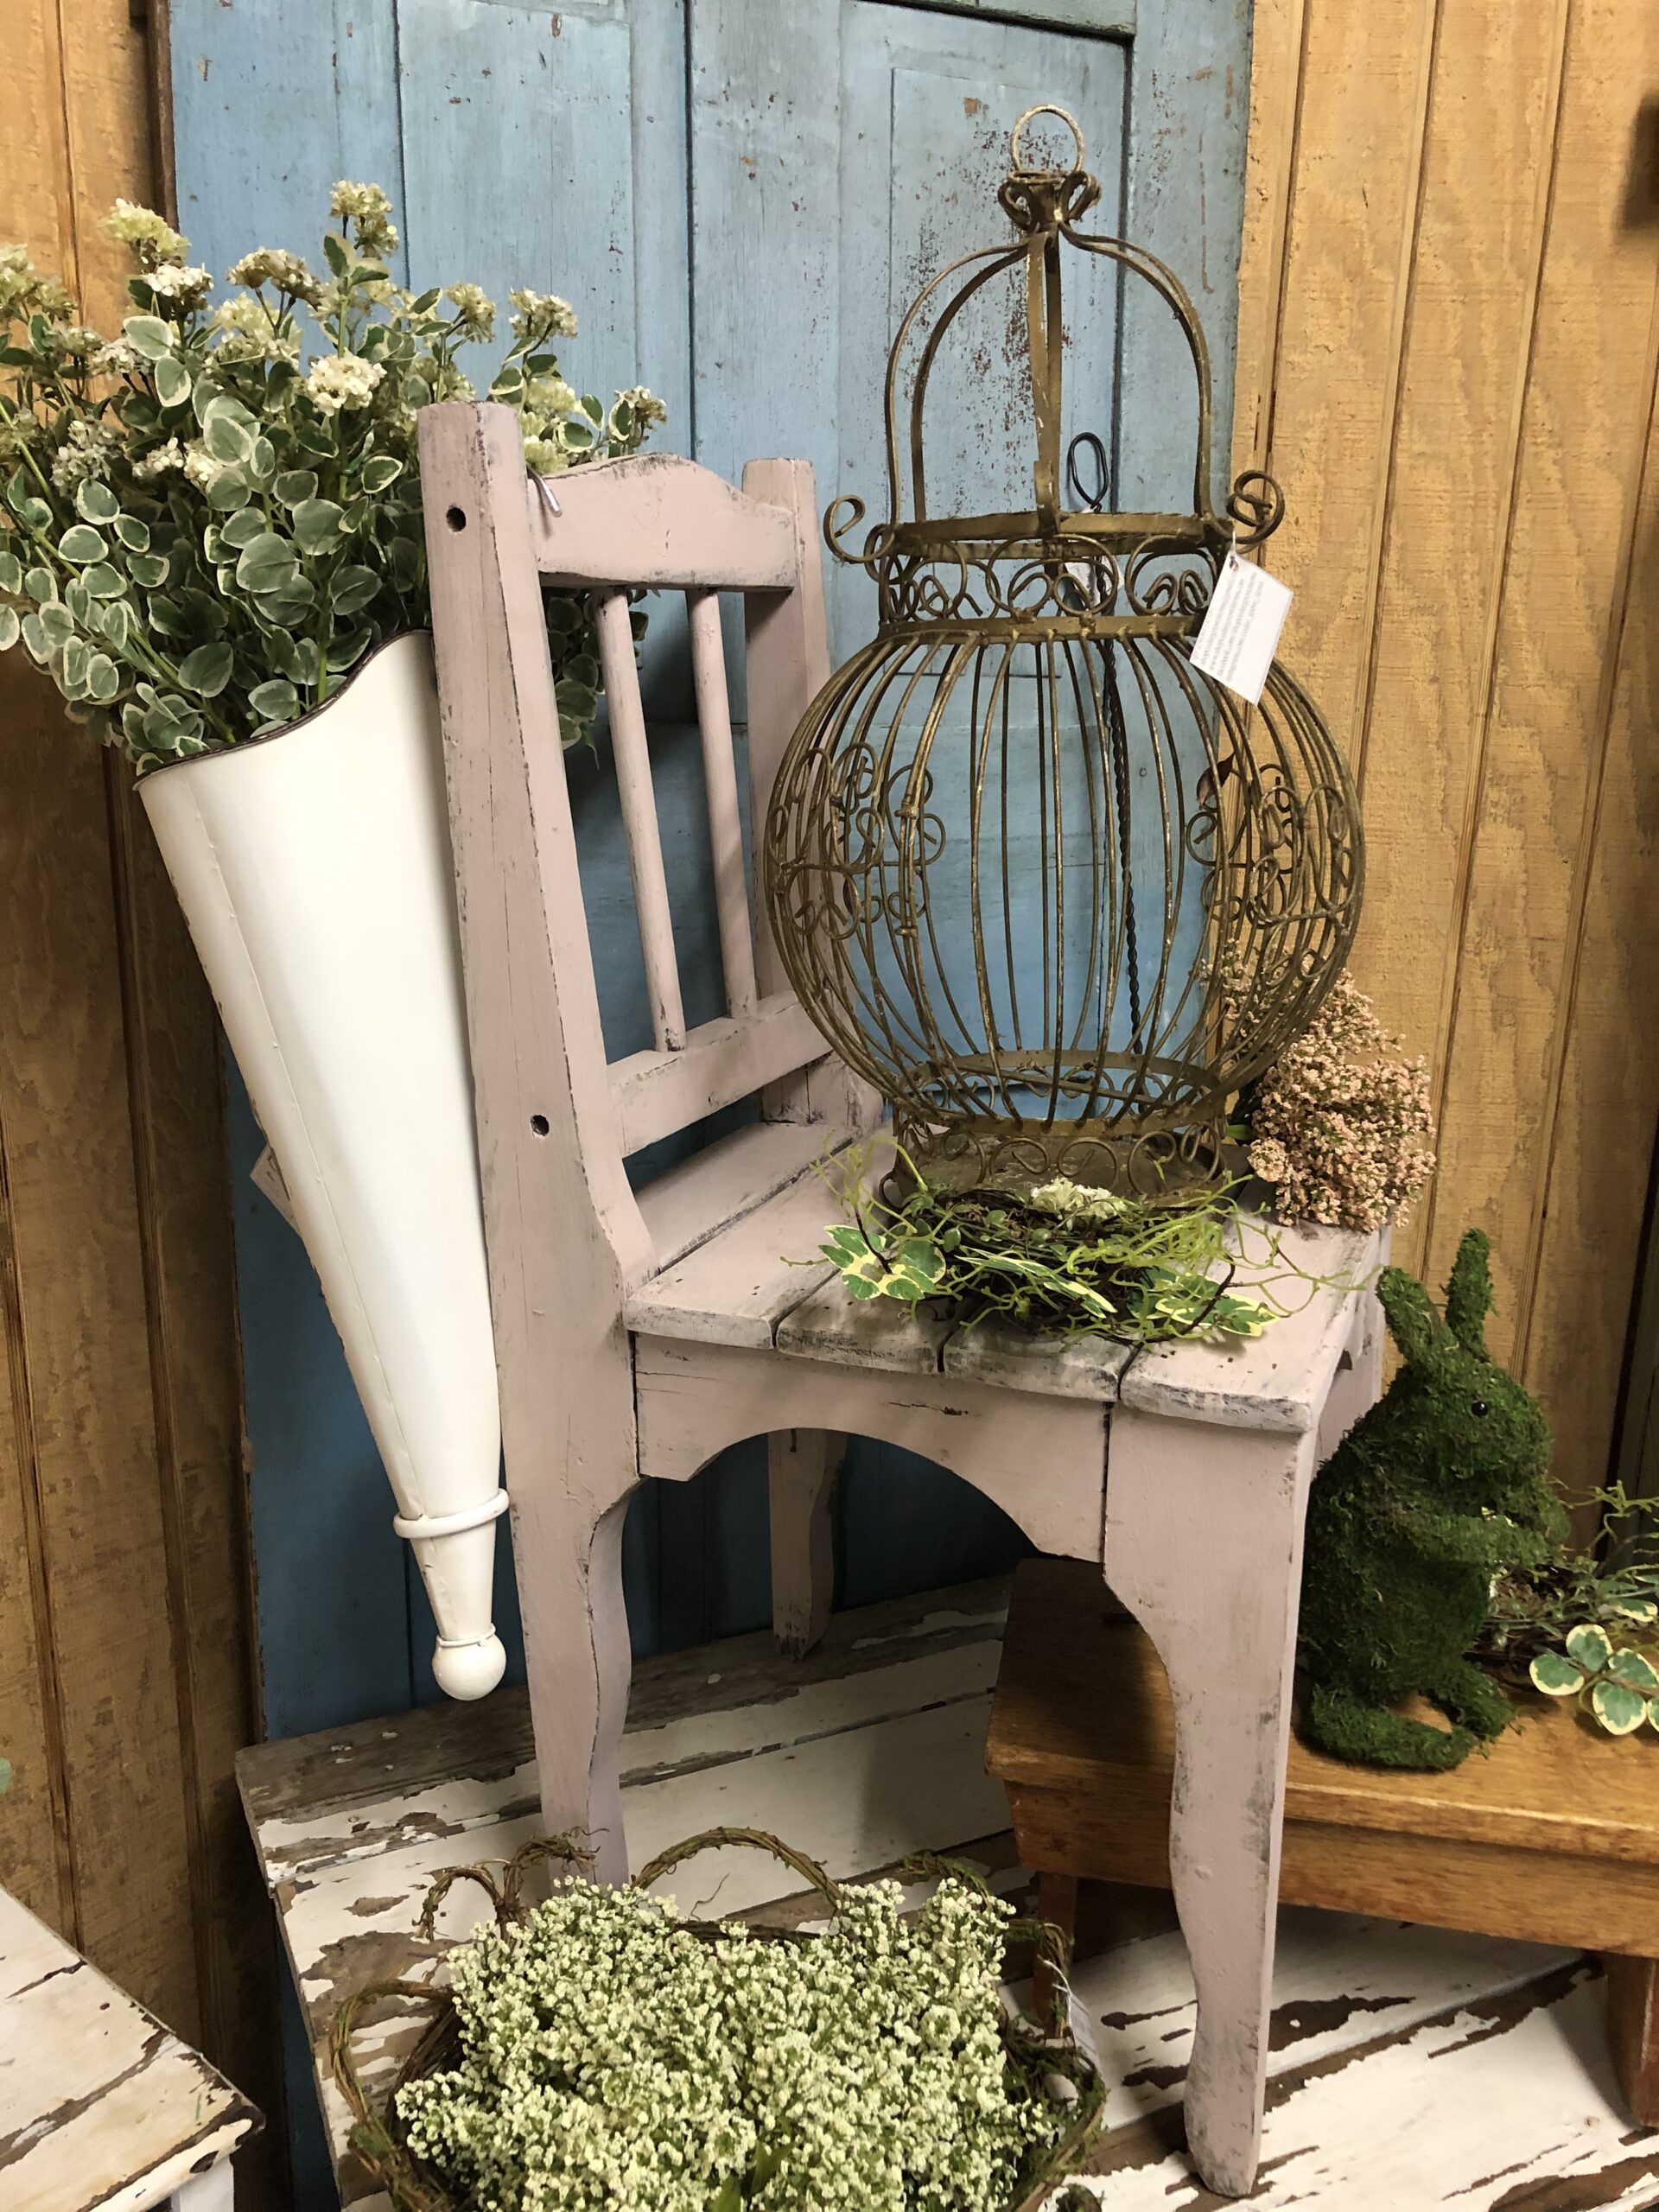 Antique iron birdcage, handmade vintage chair, and wooden peg door from PA.